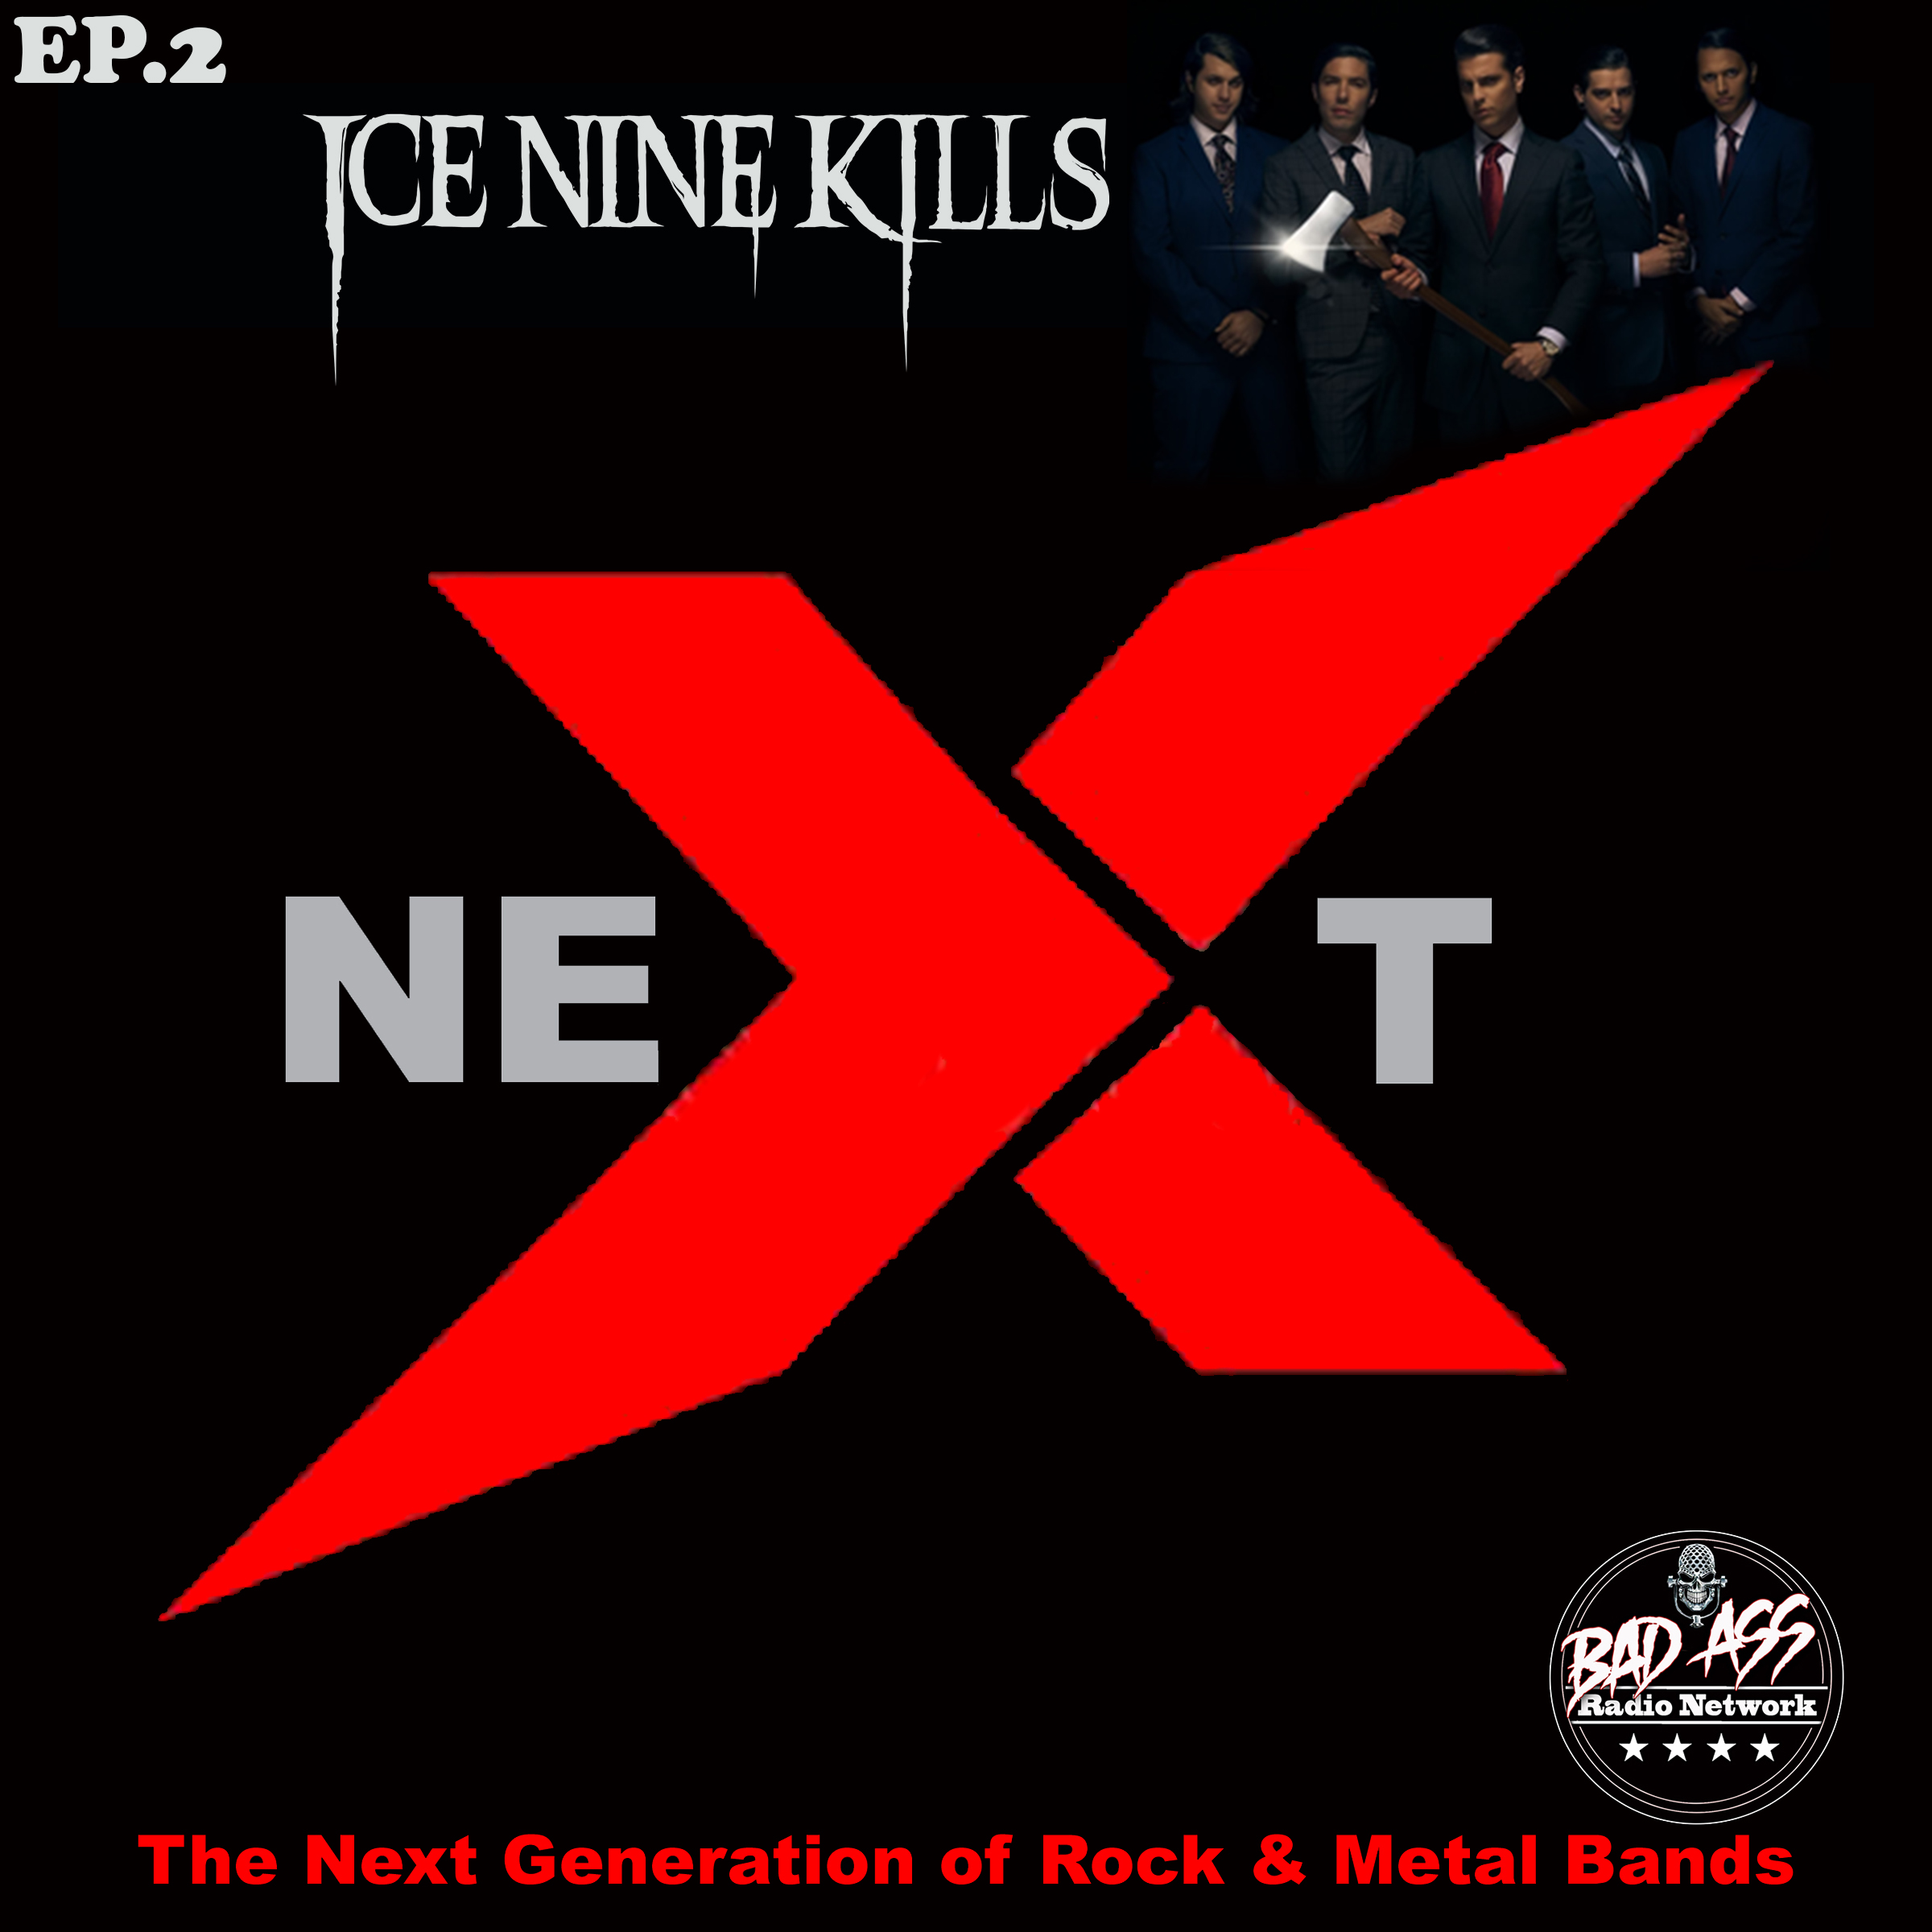 Art for EP.2 - Ice Nine Kills by neXt